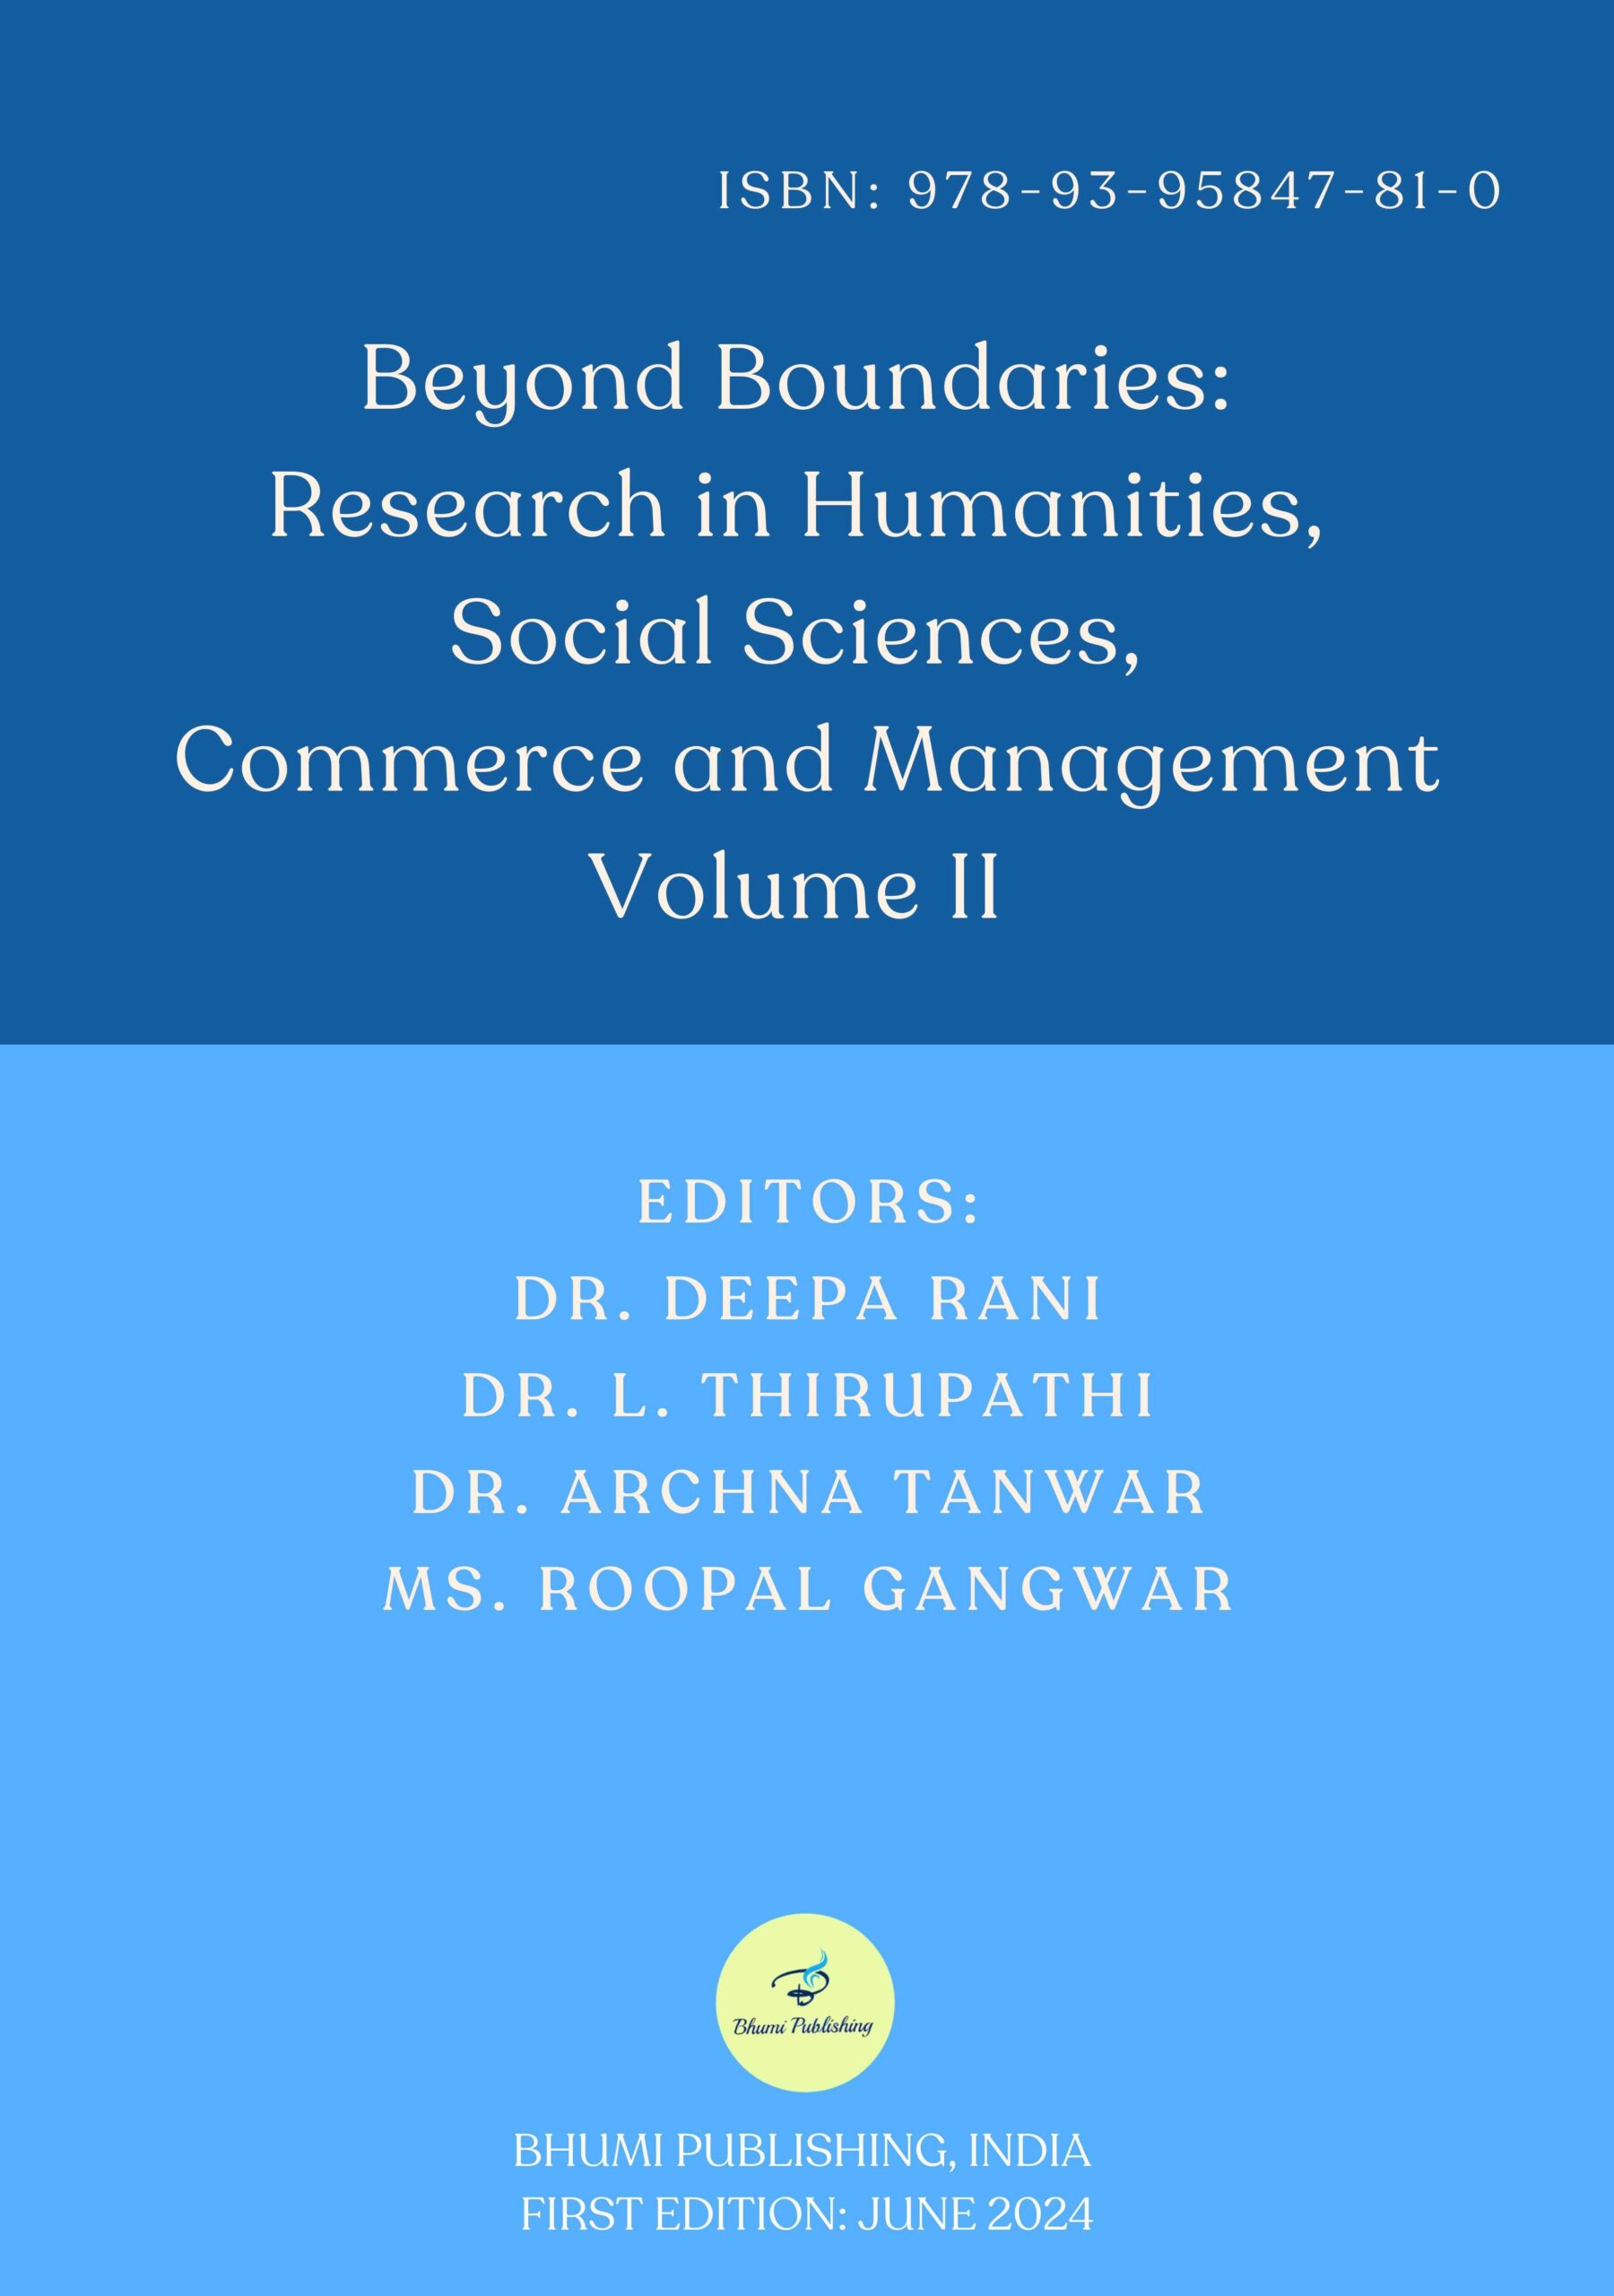 Beyond Boundaries: Research in Humanities, Social Sciences, Commerce and Management Volume II